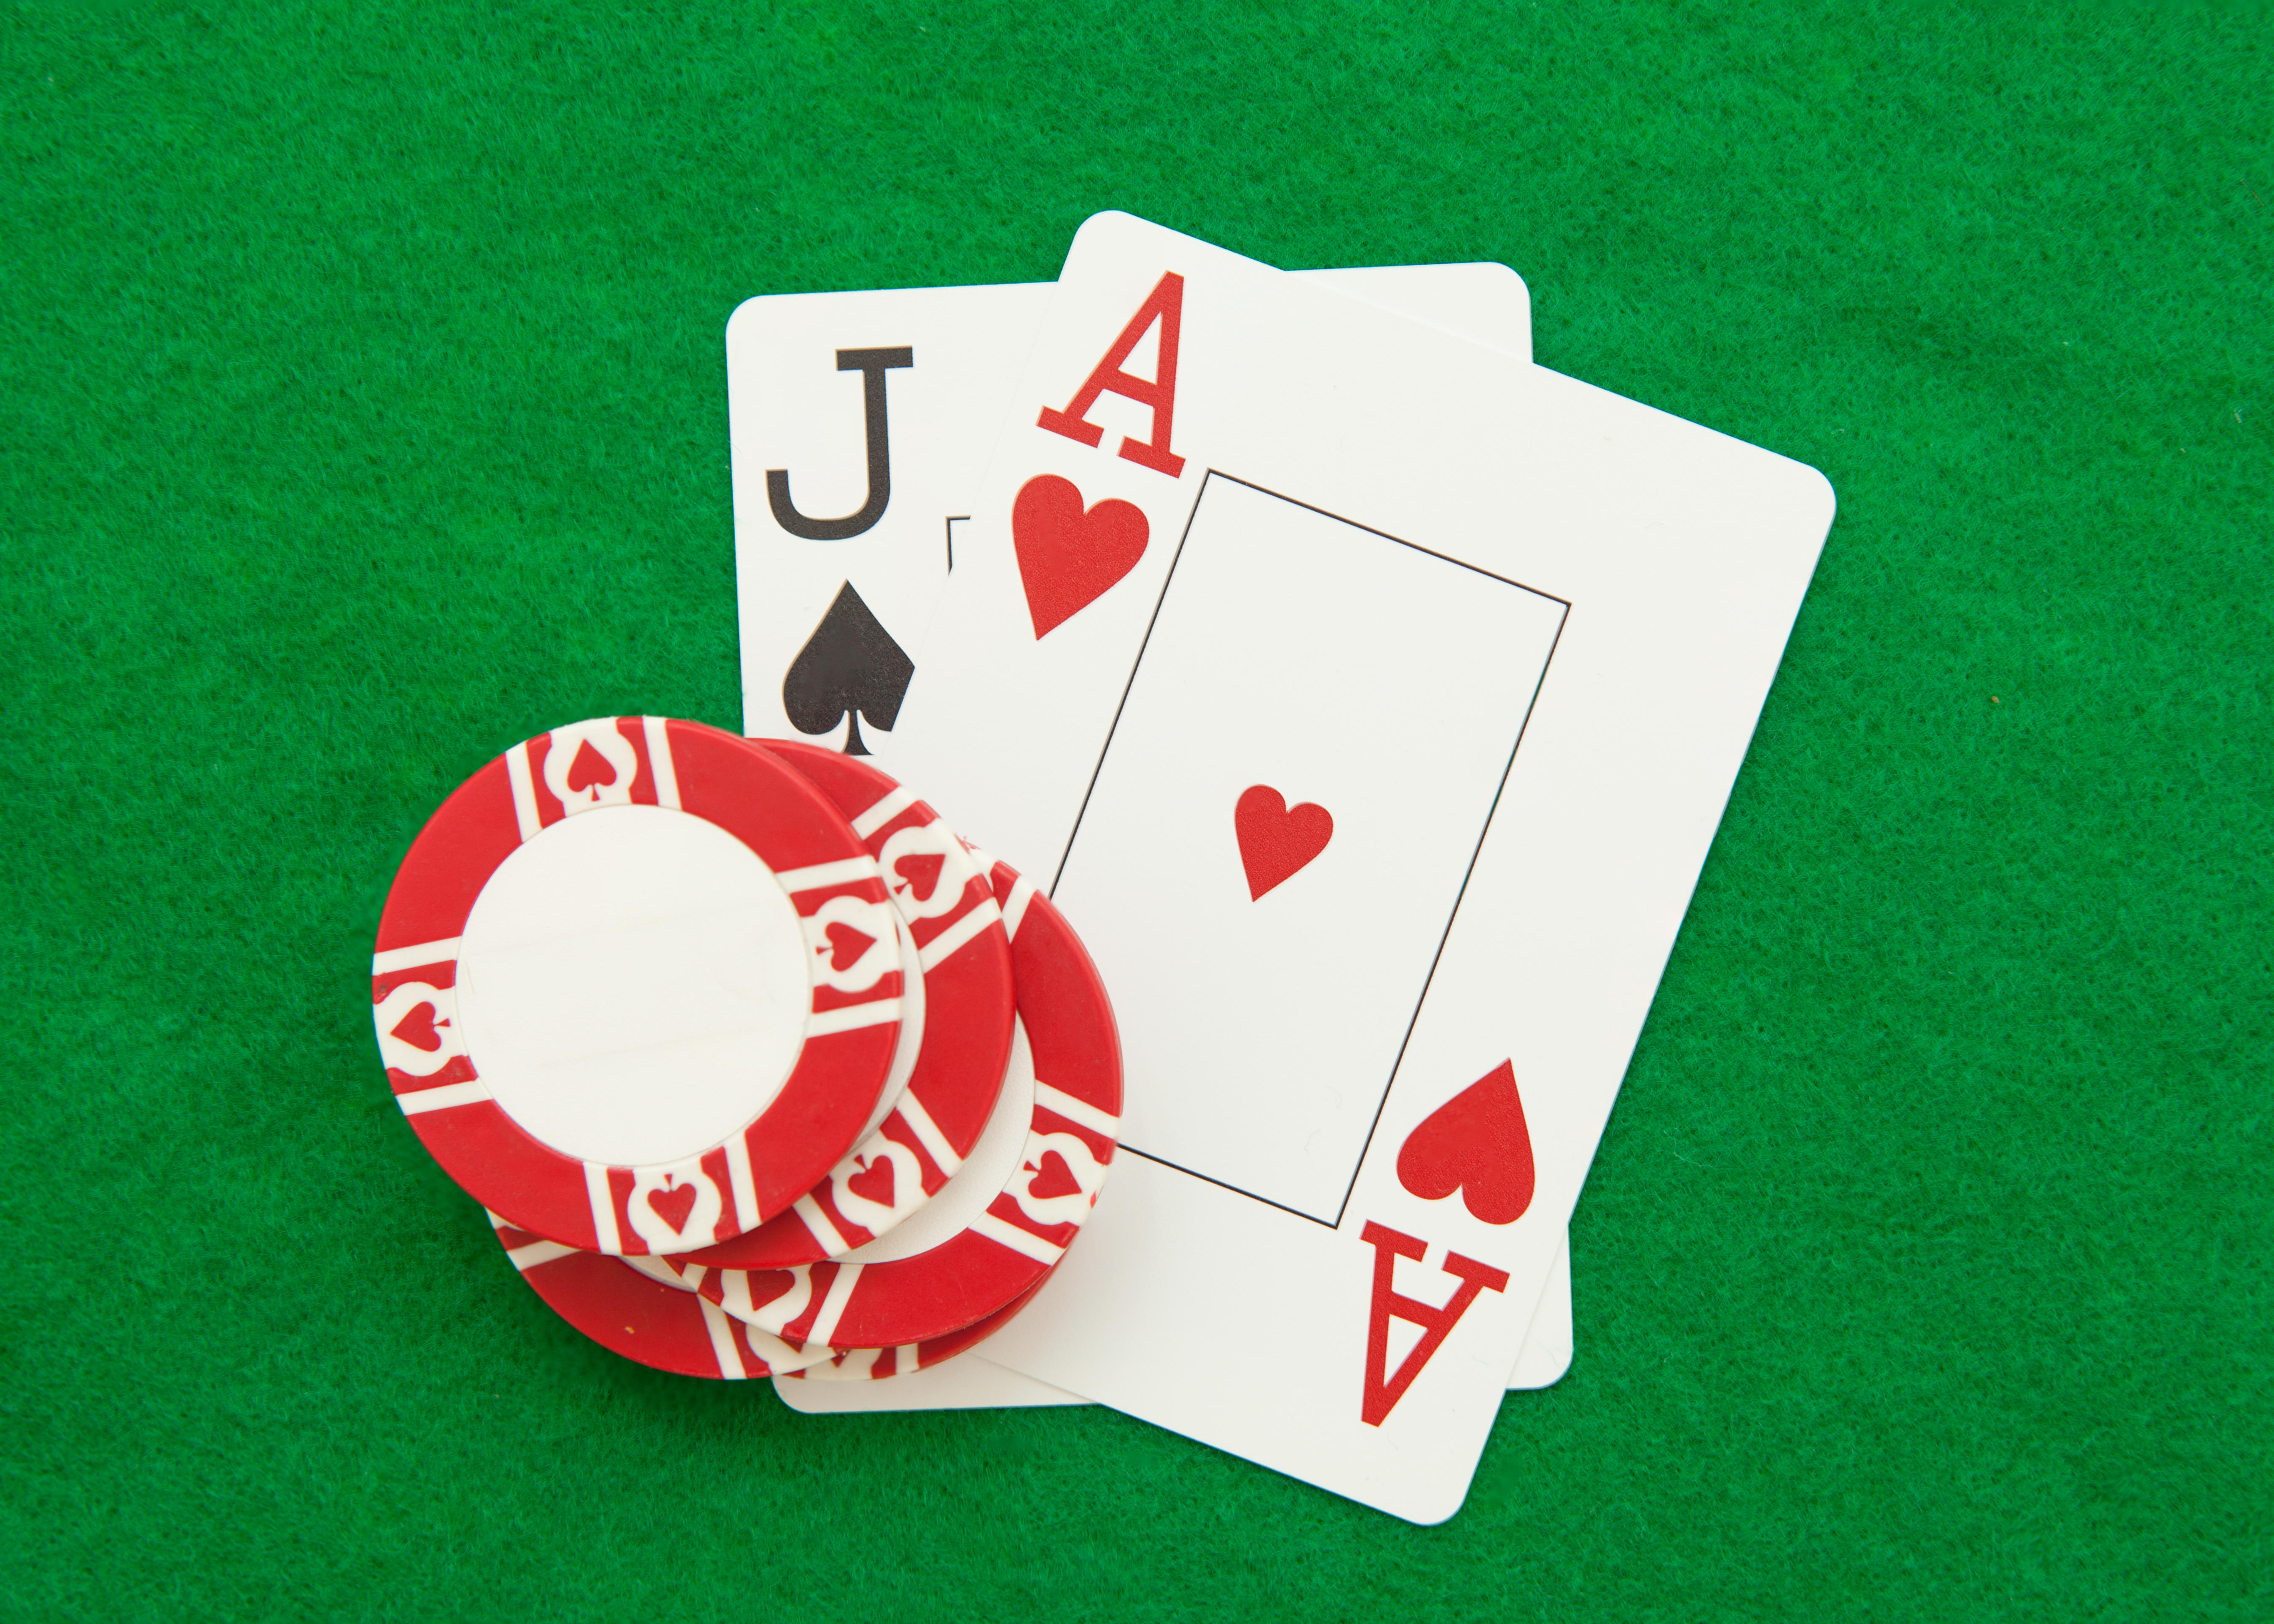 Blackjack cards and coins